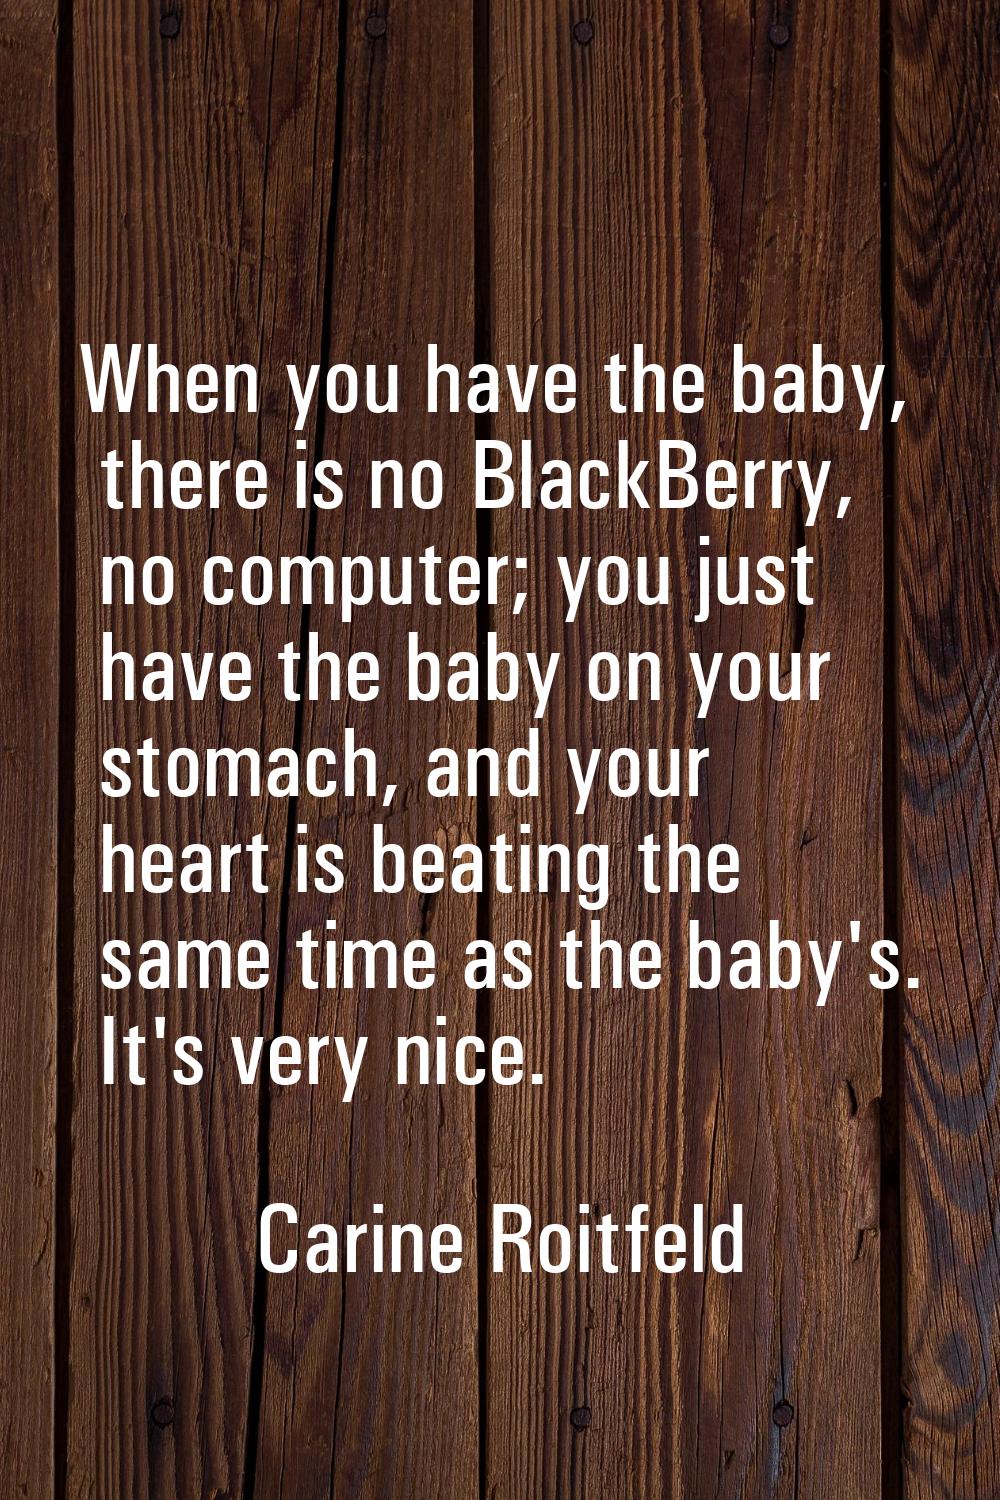 When you have the baby, there is no BlackBerry, no computer; you just have the baby on your stomach